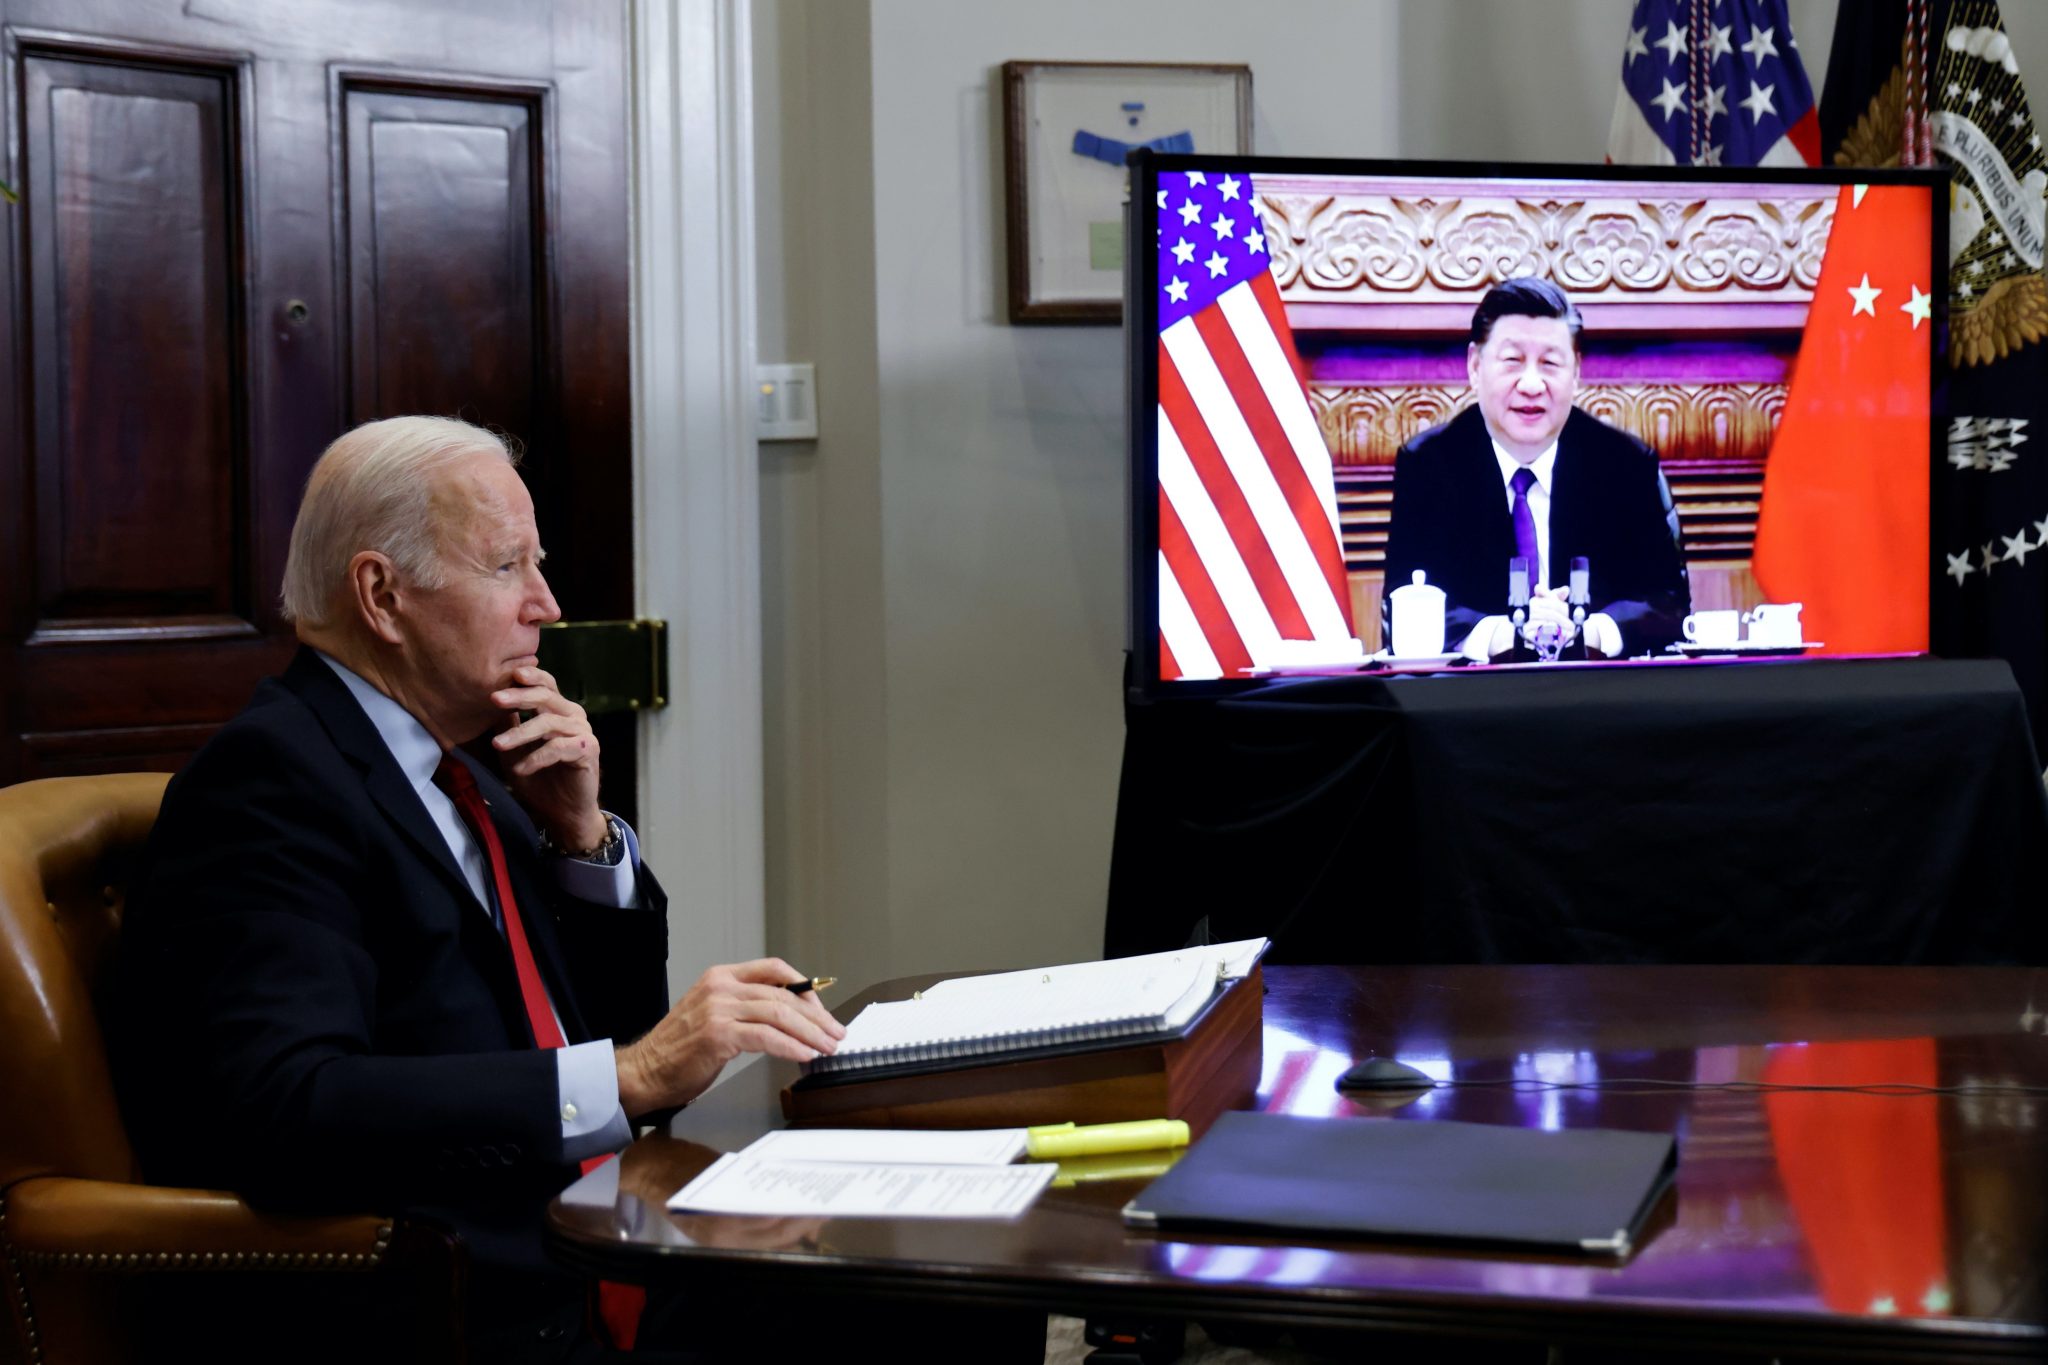 Biden’s misguided framing of US-China rivalry as democracy versus autocracy